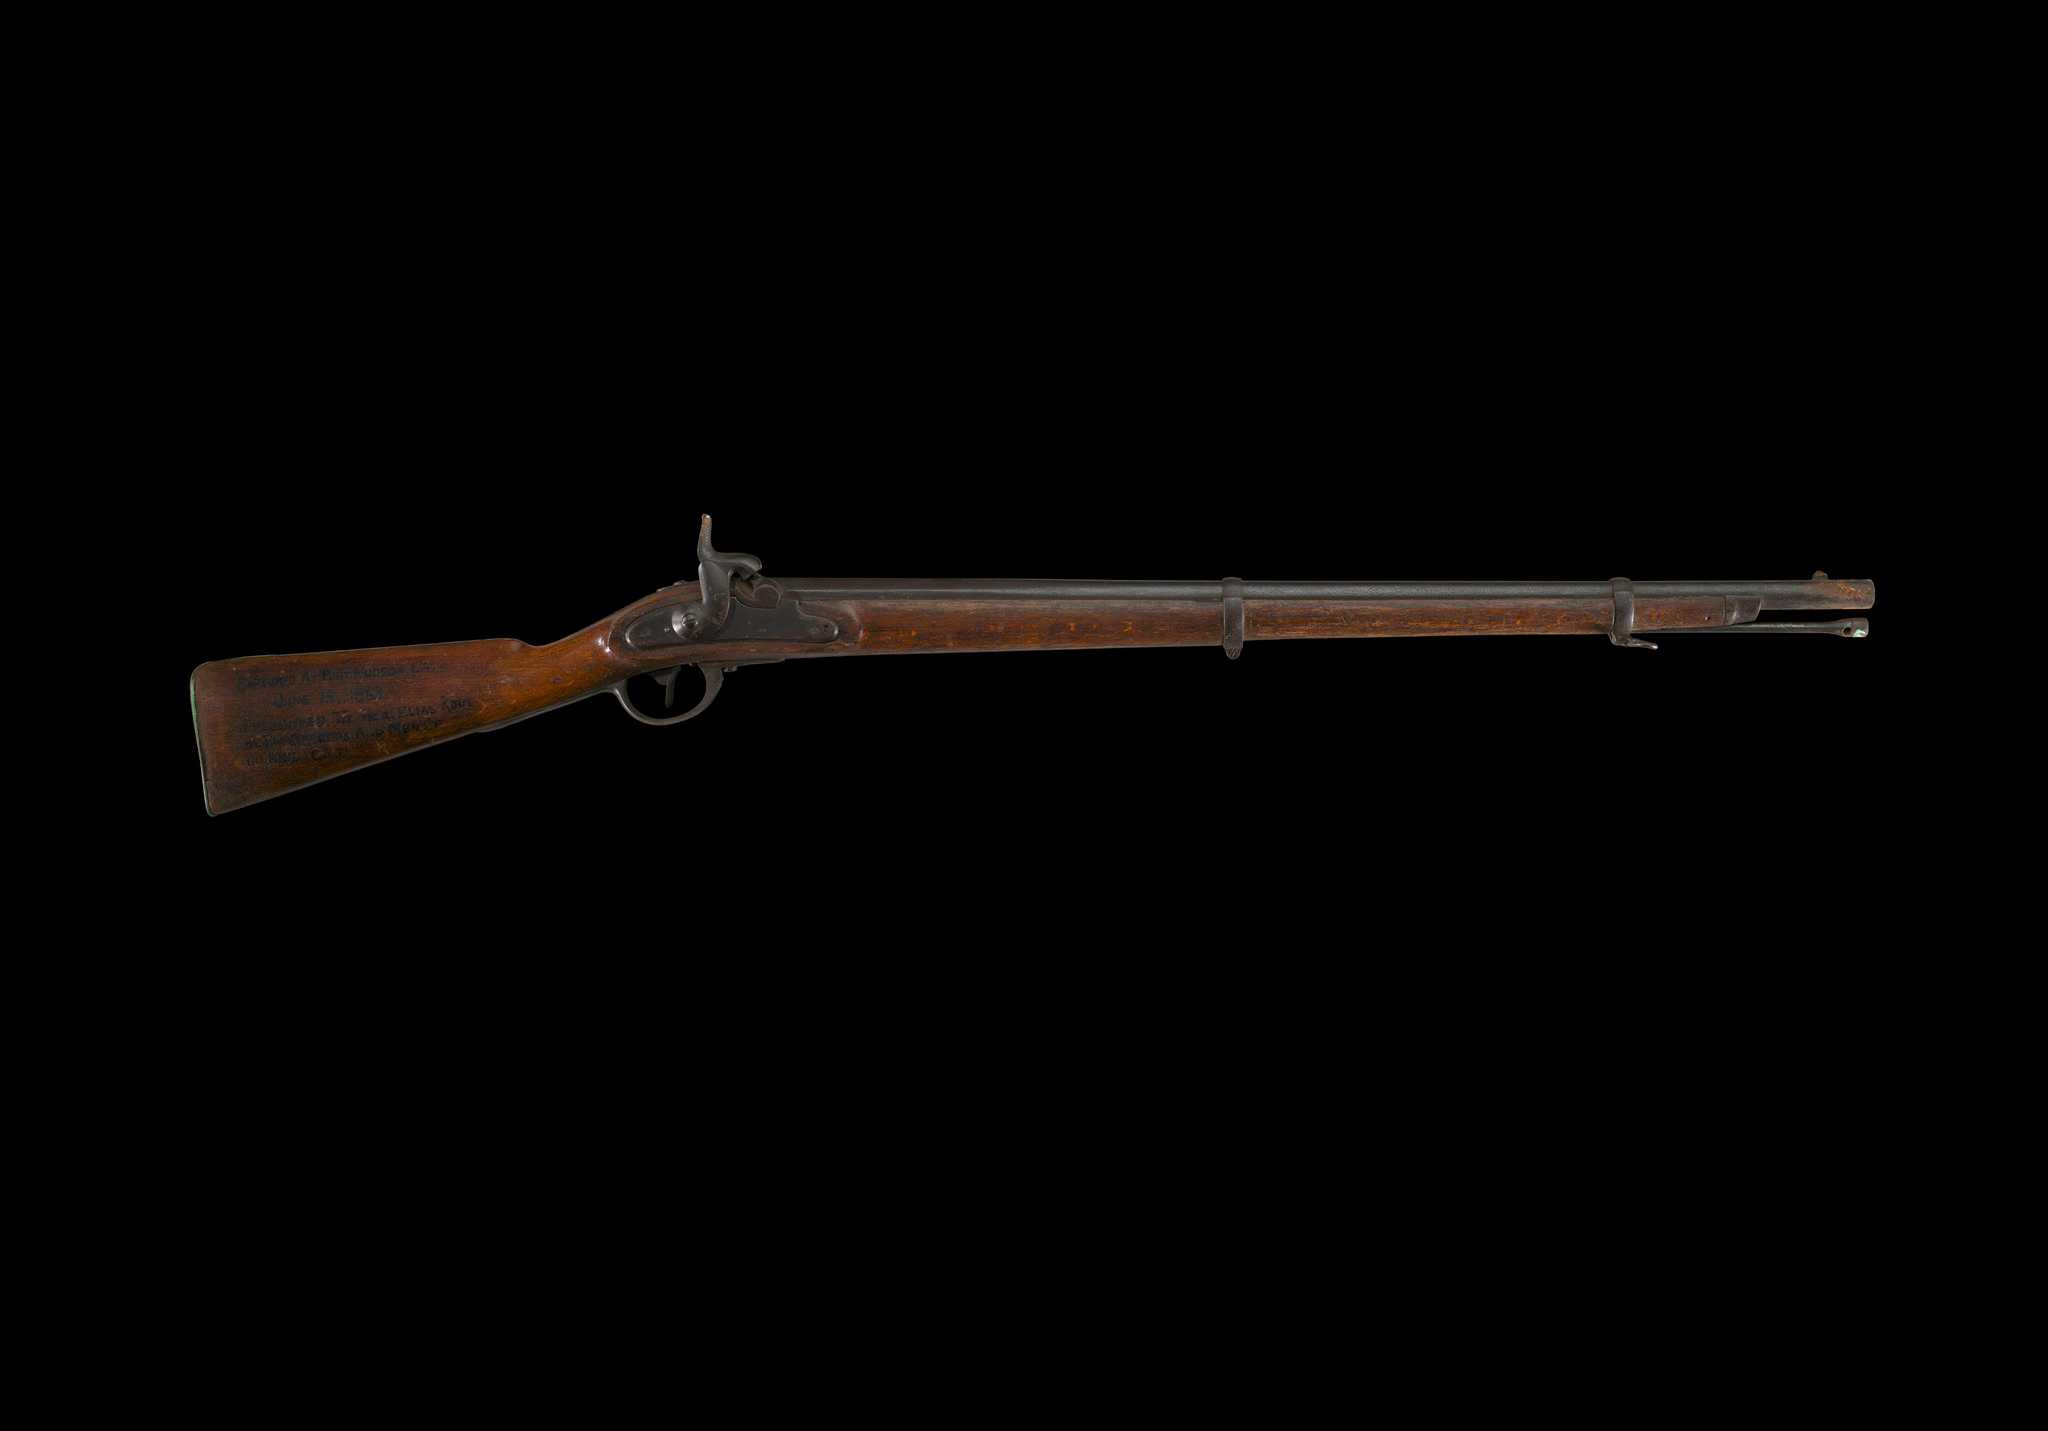 An Austrian Model 1854 .54 caliber Lorenz rifle constructed of primarily of a beech stock; steel barrel, breech ramrod; and brass butt plate and other fittings. The oxidized barrel features a front sight, stored ramrod, barrel bands, and shorted front stock. The proper left lock plate is missing. There are various markings throughout; the largest engraving was added post-manufacture and constitutes the entire proper right stock: [CAPTURED AT PORT HUDSON LA. / JUNE 13, 1863 / PRESENTED TO HON. ELIAS ROOT / BY THE OFFICERS AND MEN OF / 110 N.Y.V. Co I]. The proper right lock plate, parallel to the hammer, shows an engraving “860”. A “26” is painted in a square on the proper left of the stock. There is a long split in the stock’s wood from the butt, and areas of wood replacement closest to the butt, where an oxidized plate features the engraving of “C S” below a stock screw. An off-white auction tag identifying the rifle and lot number, is tied by string to the trigger guard.